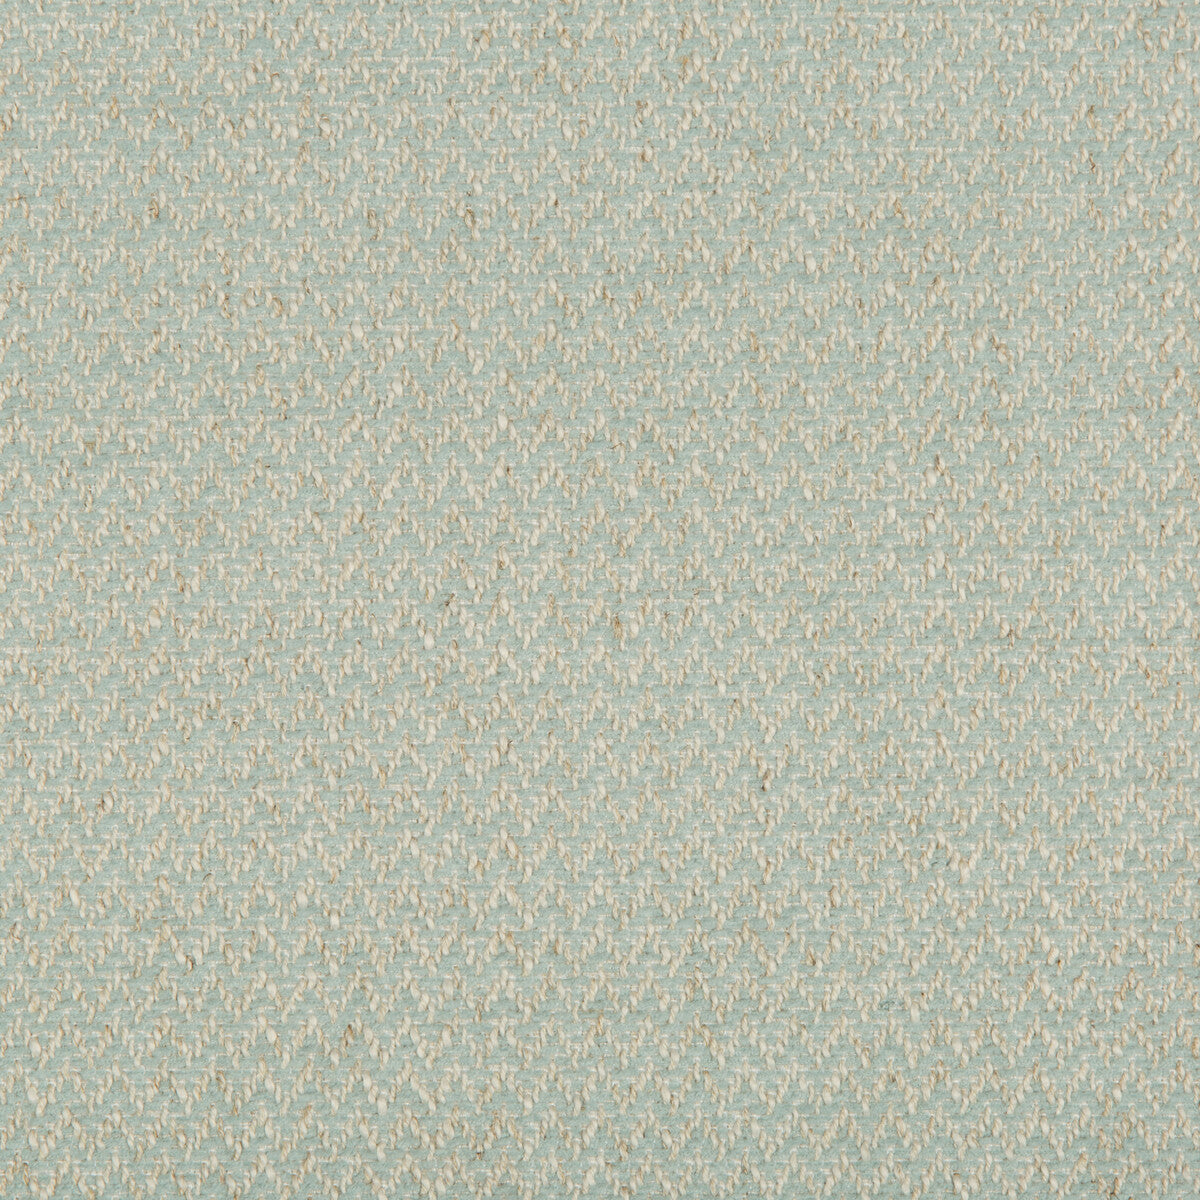 Kravet Contract fabric in 35408-23 color - pattern 35408.23.0 - by Kravet Contract in the Crypton Incase collection